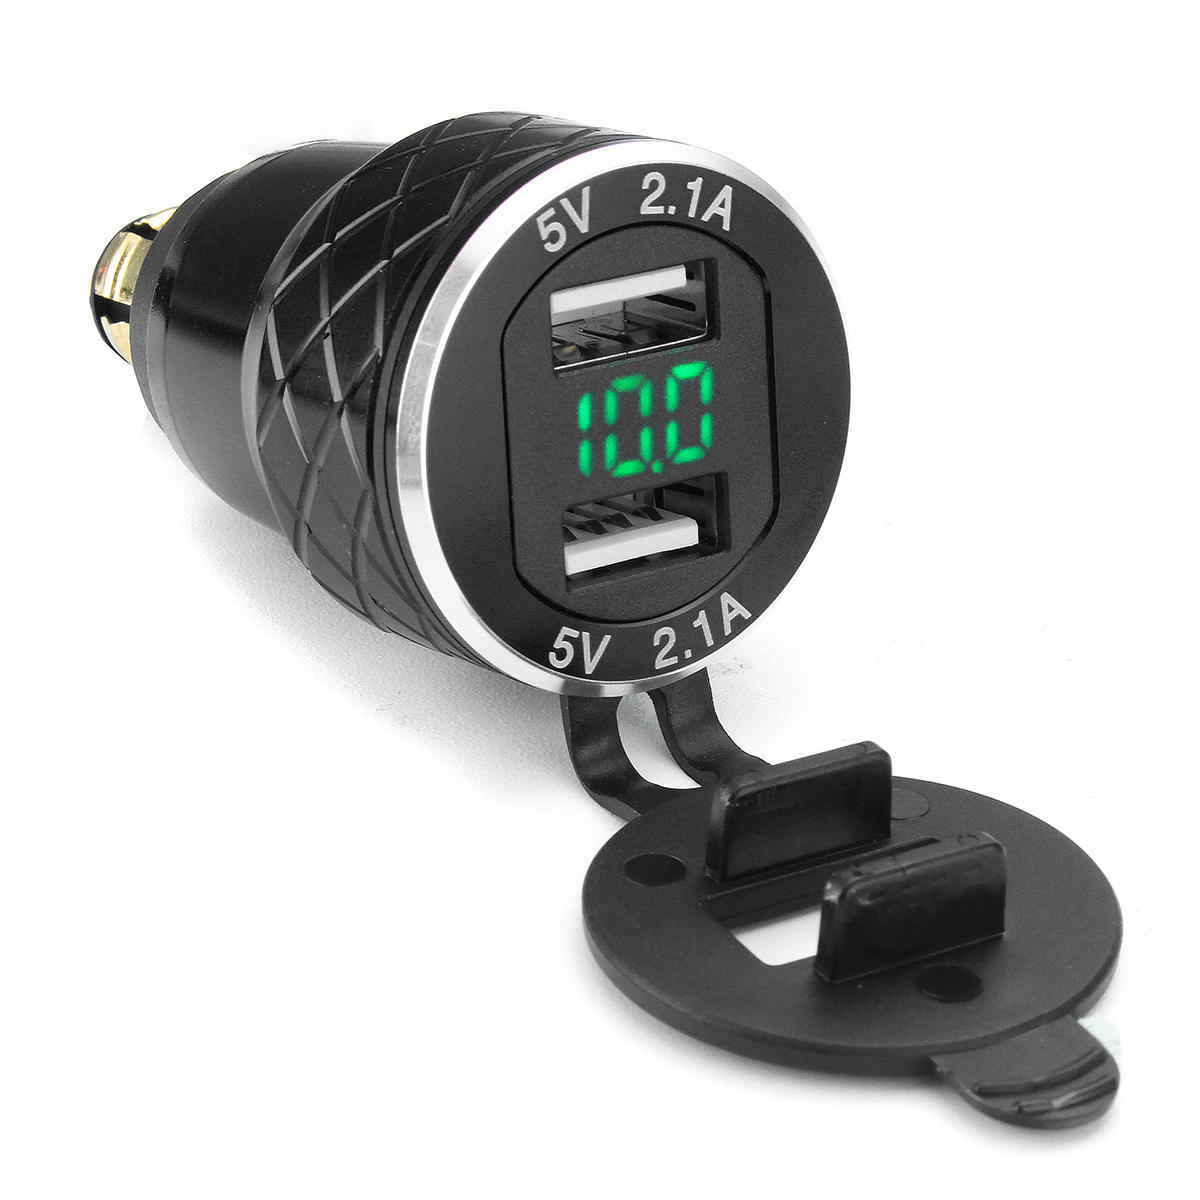 4.2A Motorcycle USB Charger Voltmeter Thermometer w//Phone Intelligent Location